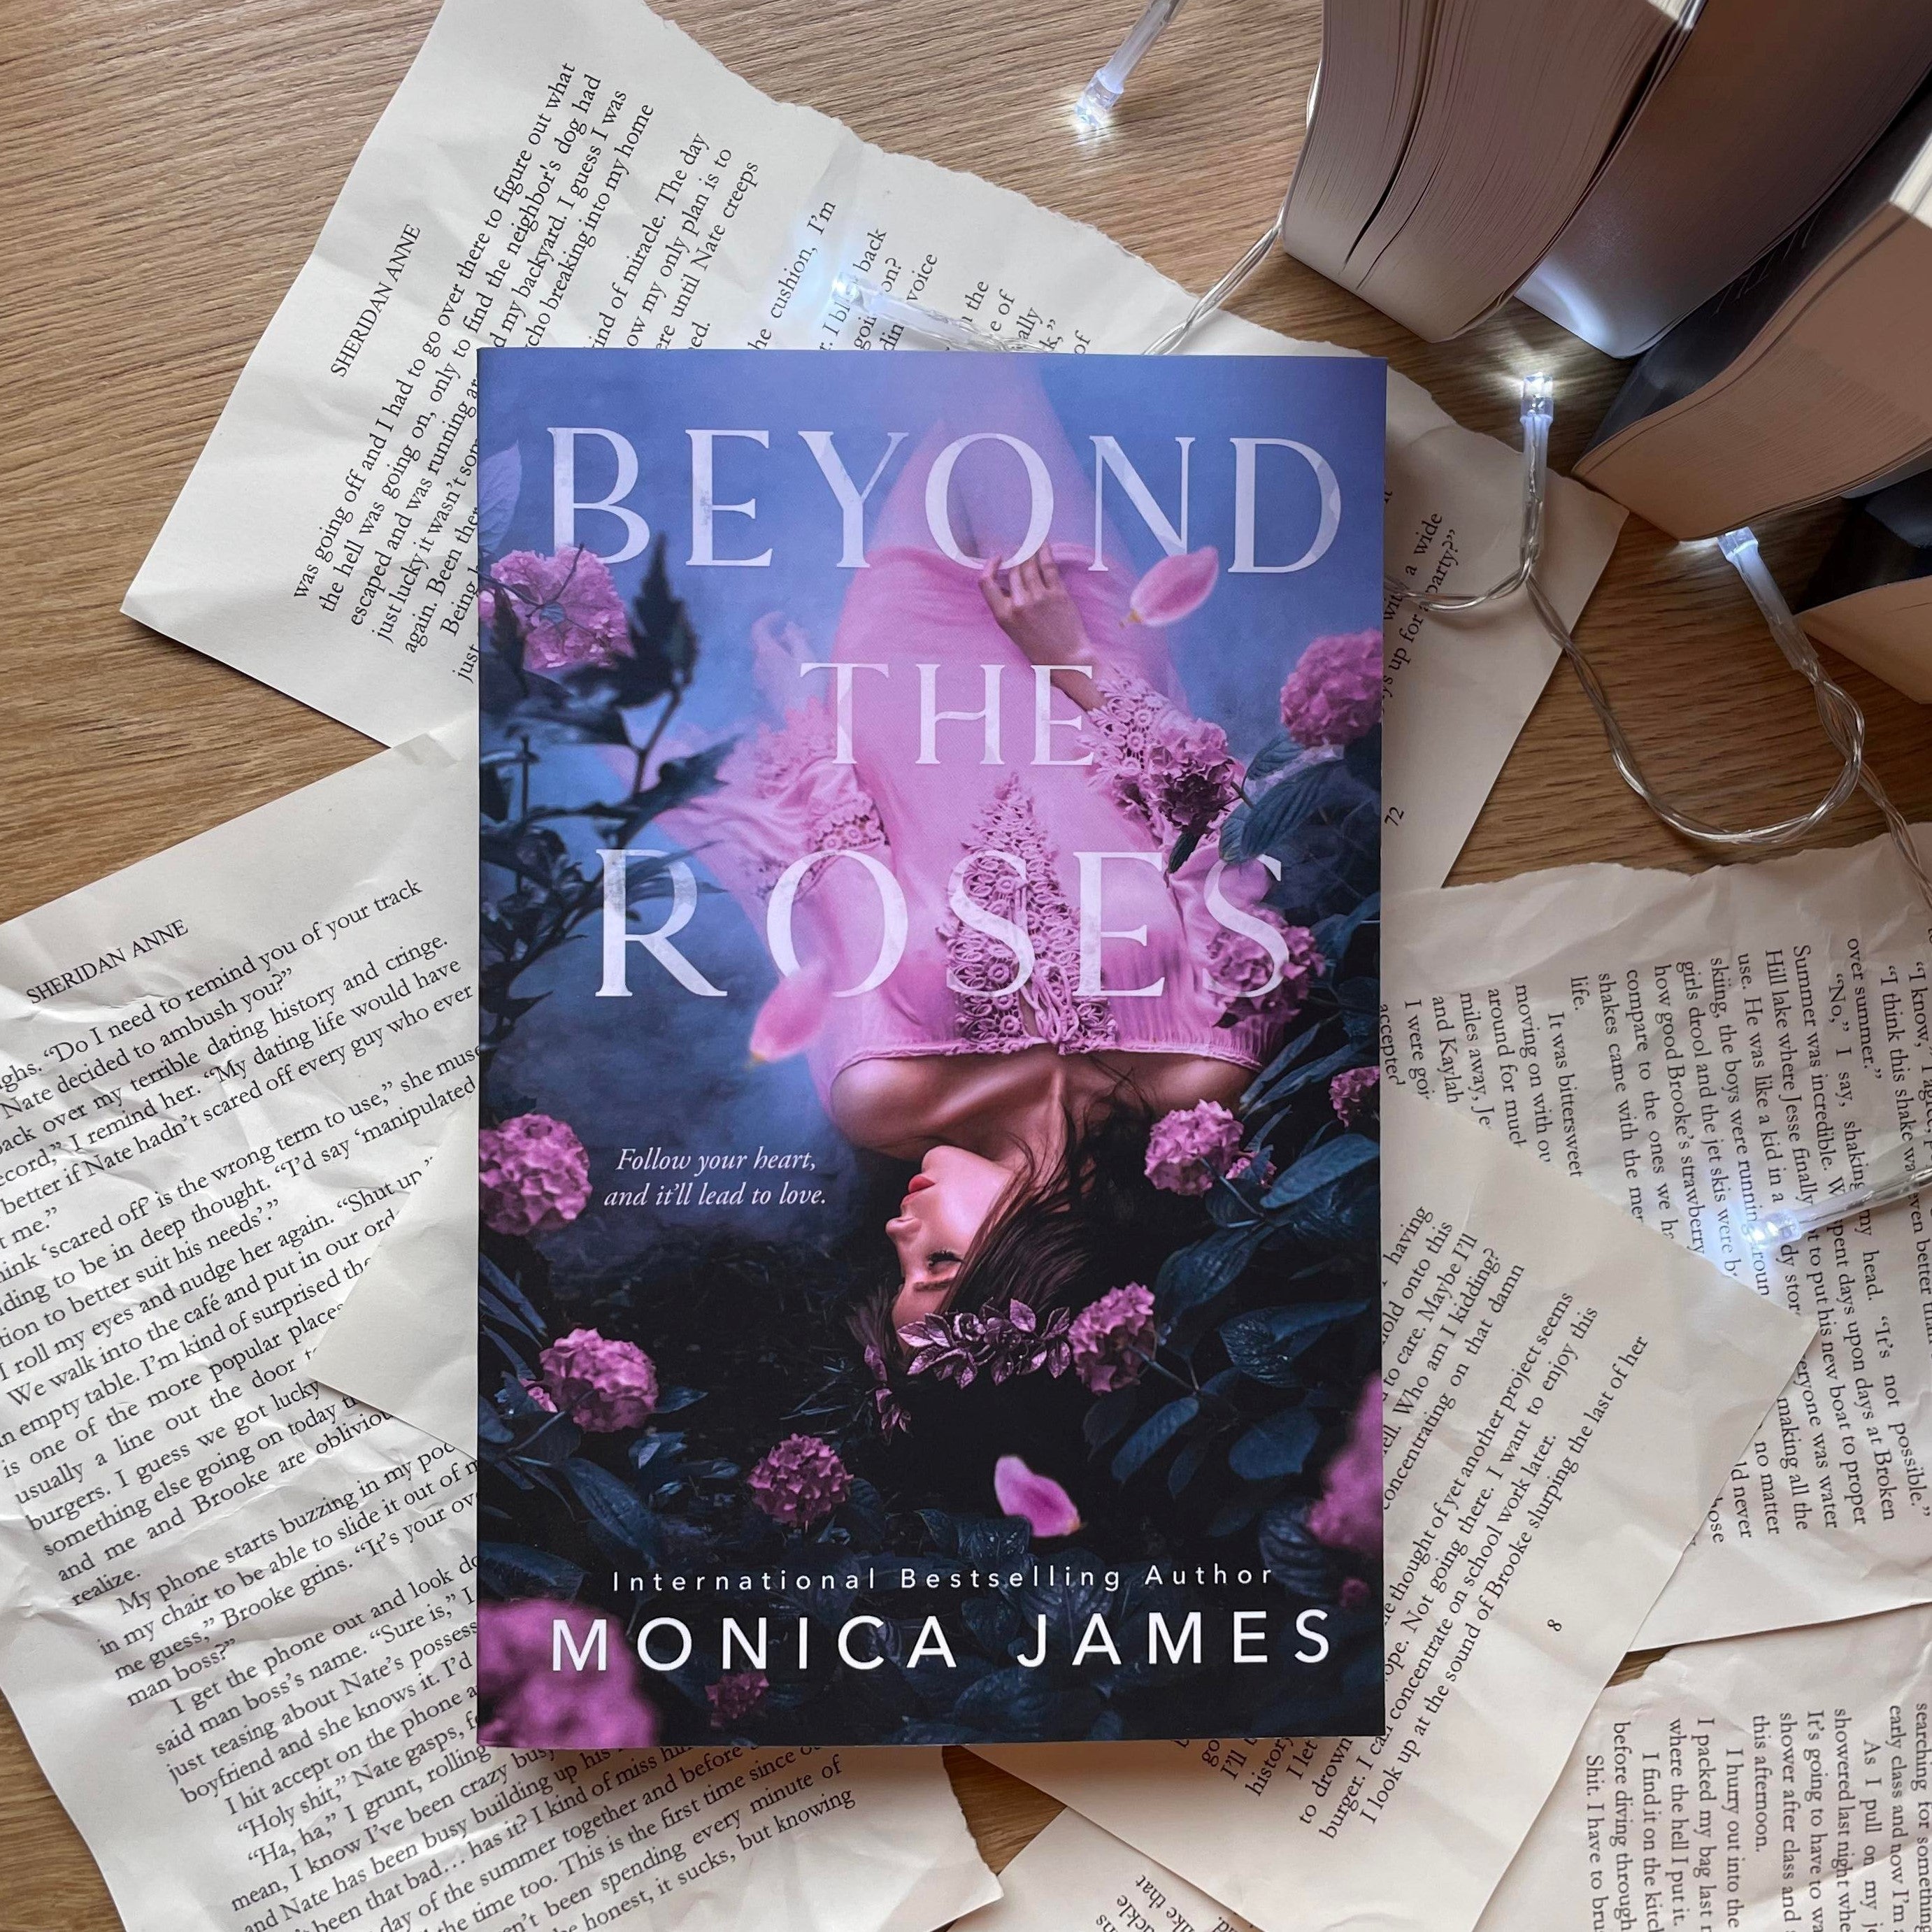 Beyond The Roses by Monica James